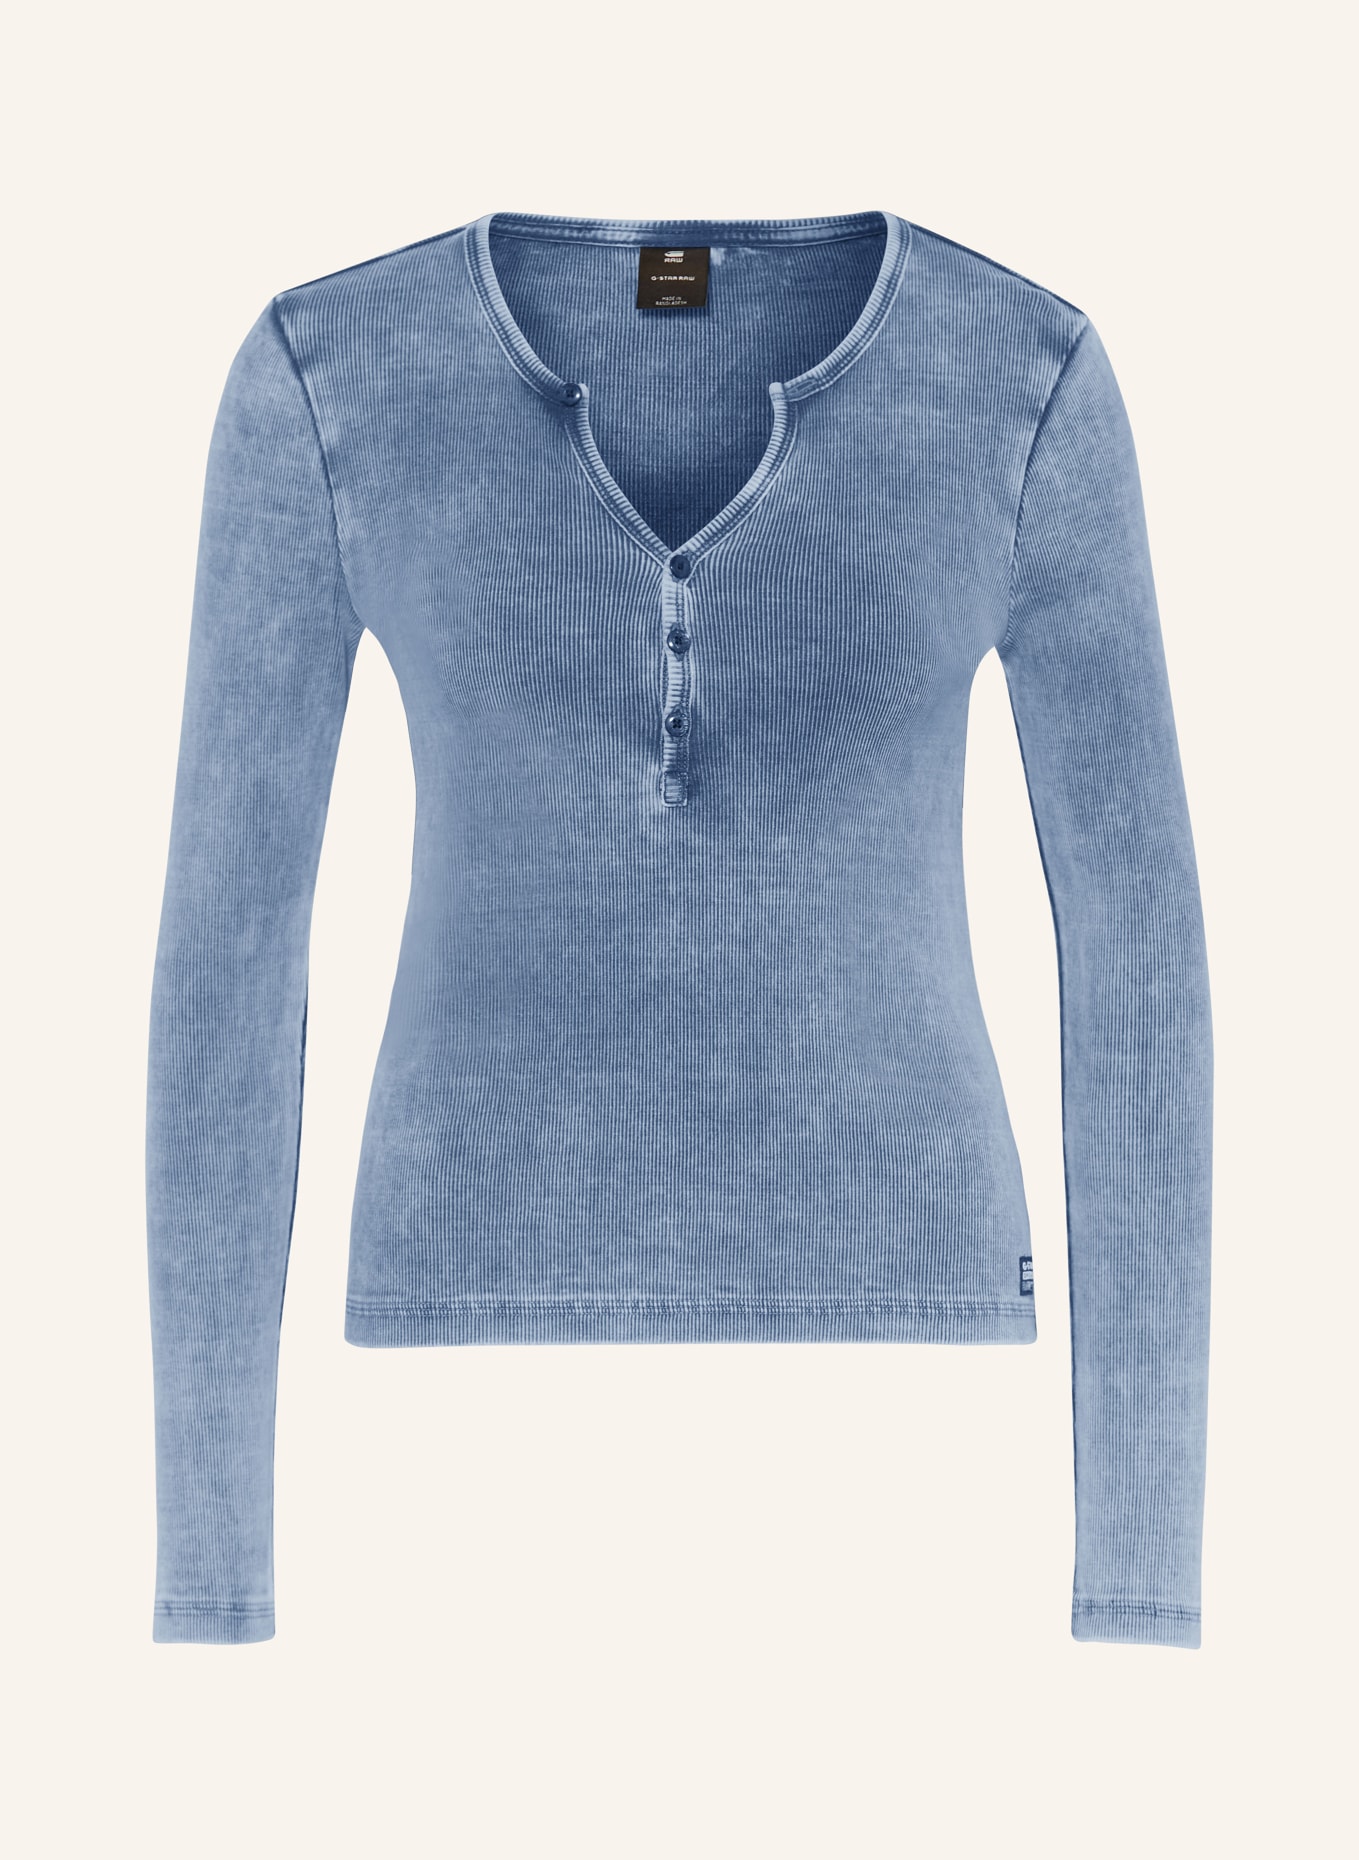 G-Star RAW Henley shirt, Color: BLUE (Image 1)